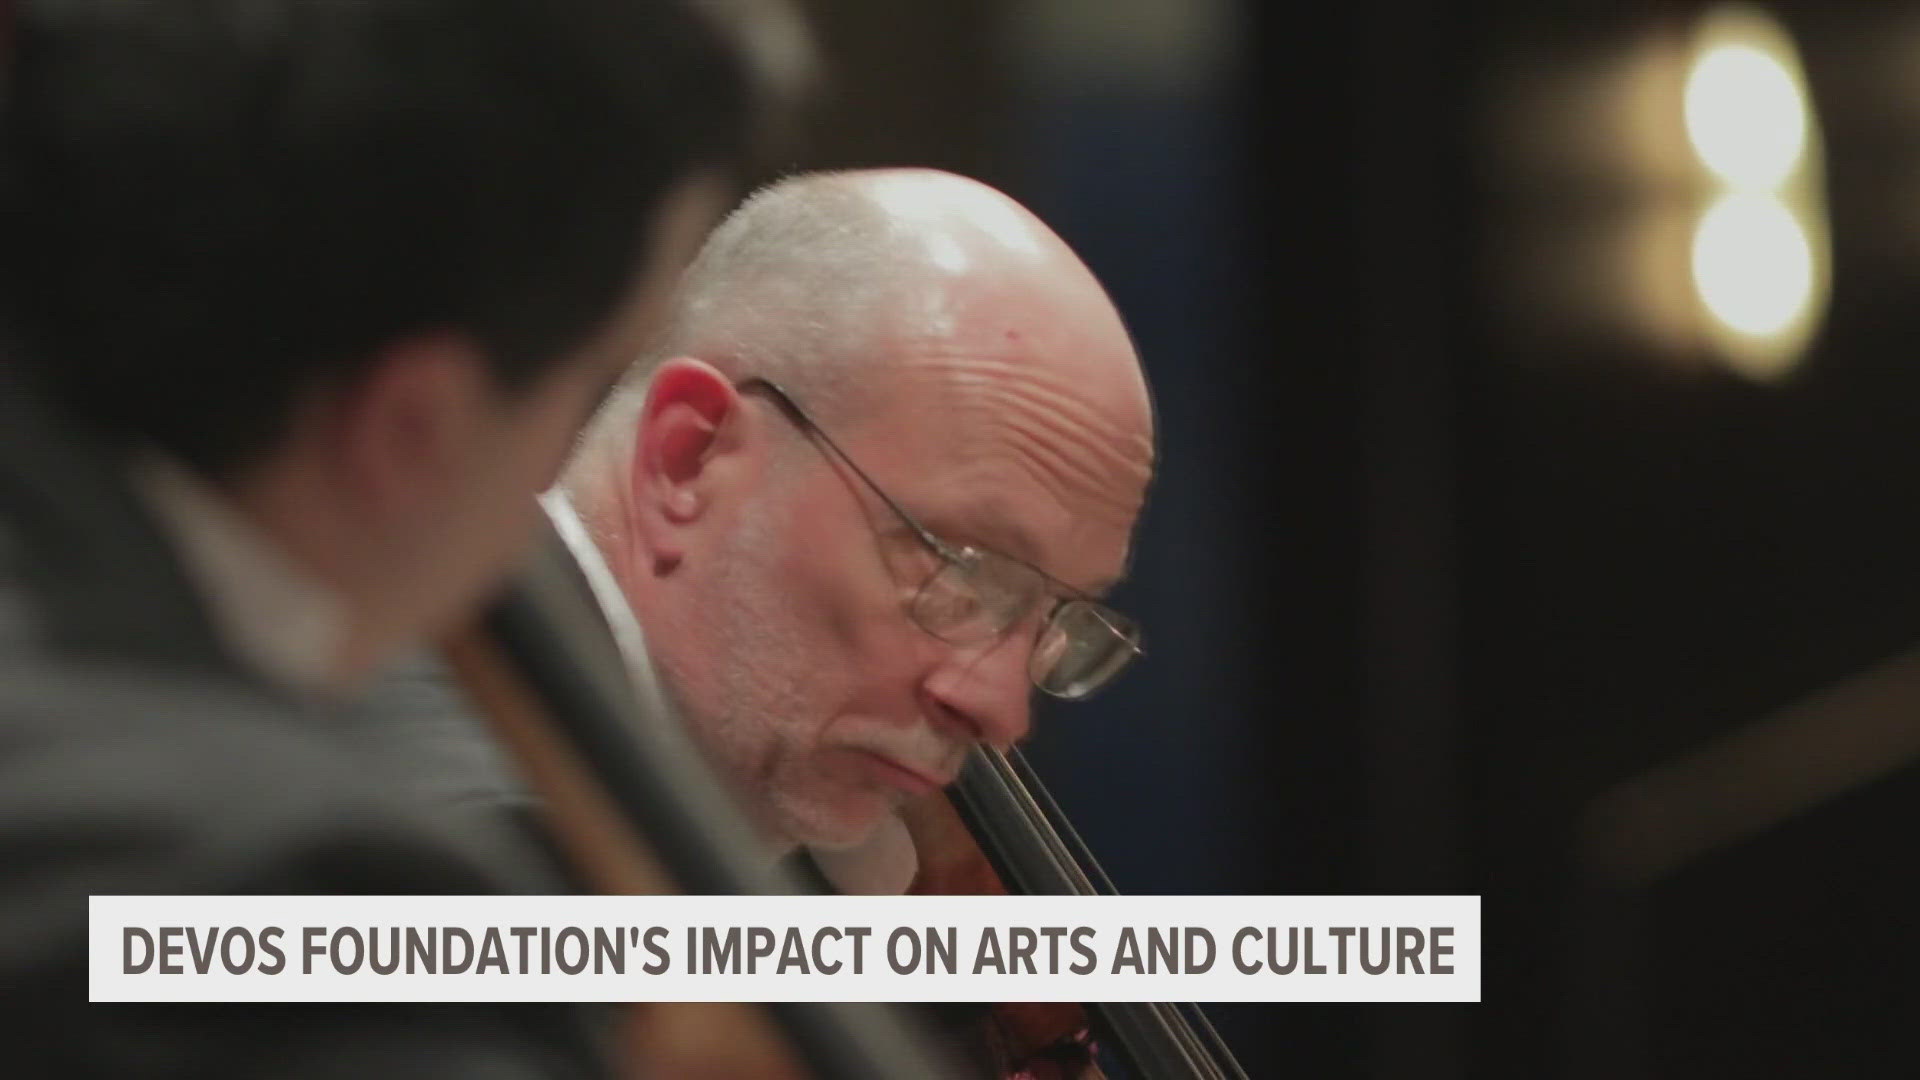 The foundation has supported and donated to many musical and artistic organizations in Grand Rapids.